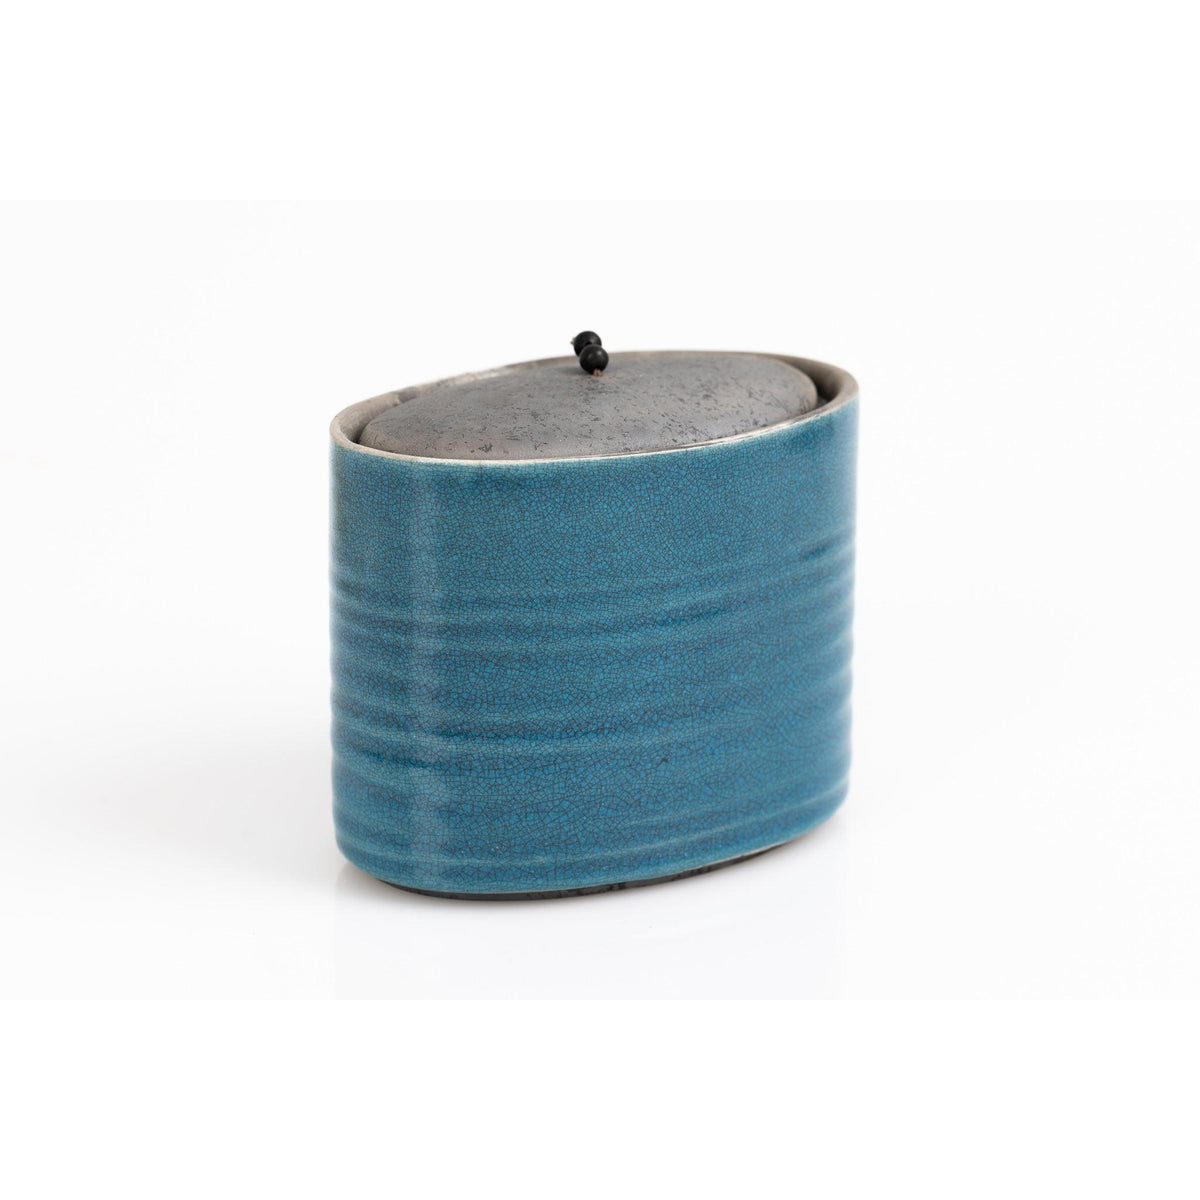 KSDD1 Ellipse, Raku Oval Container by Kate Schuricht, available at Padstow Gallery, Cornwall